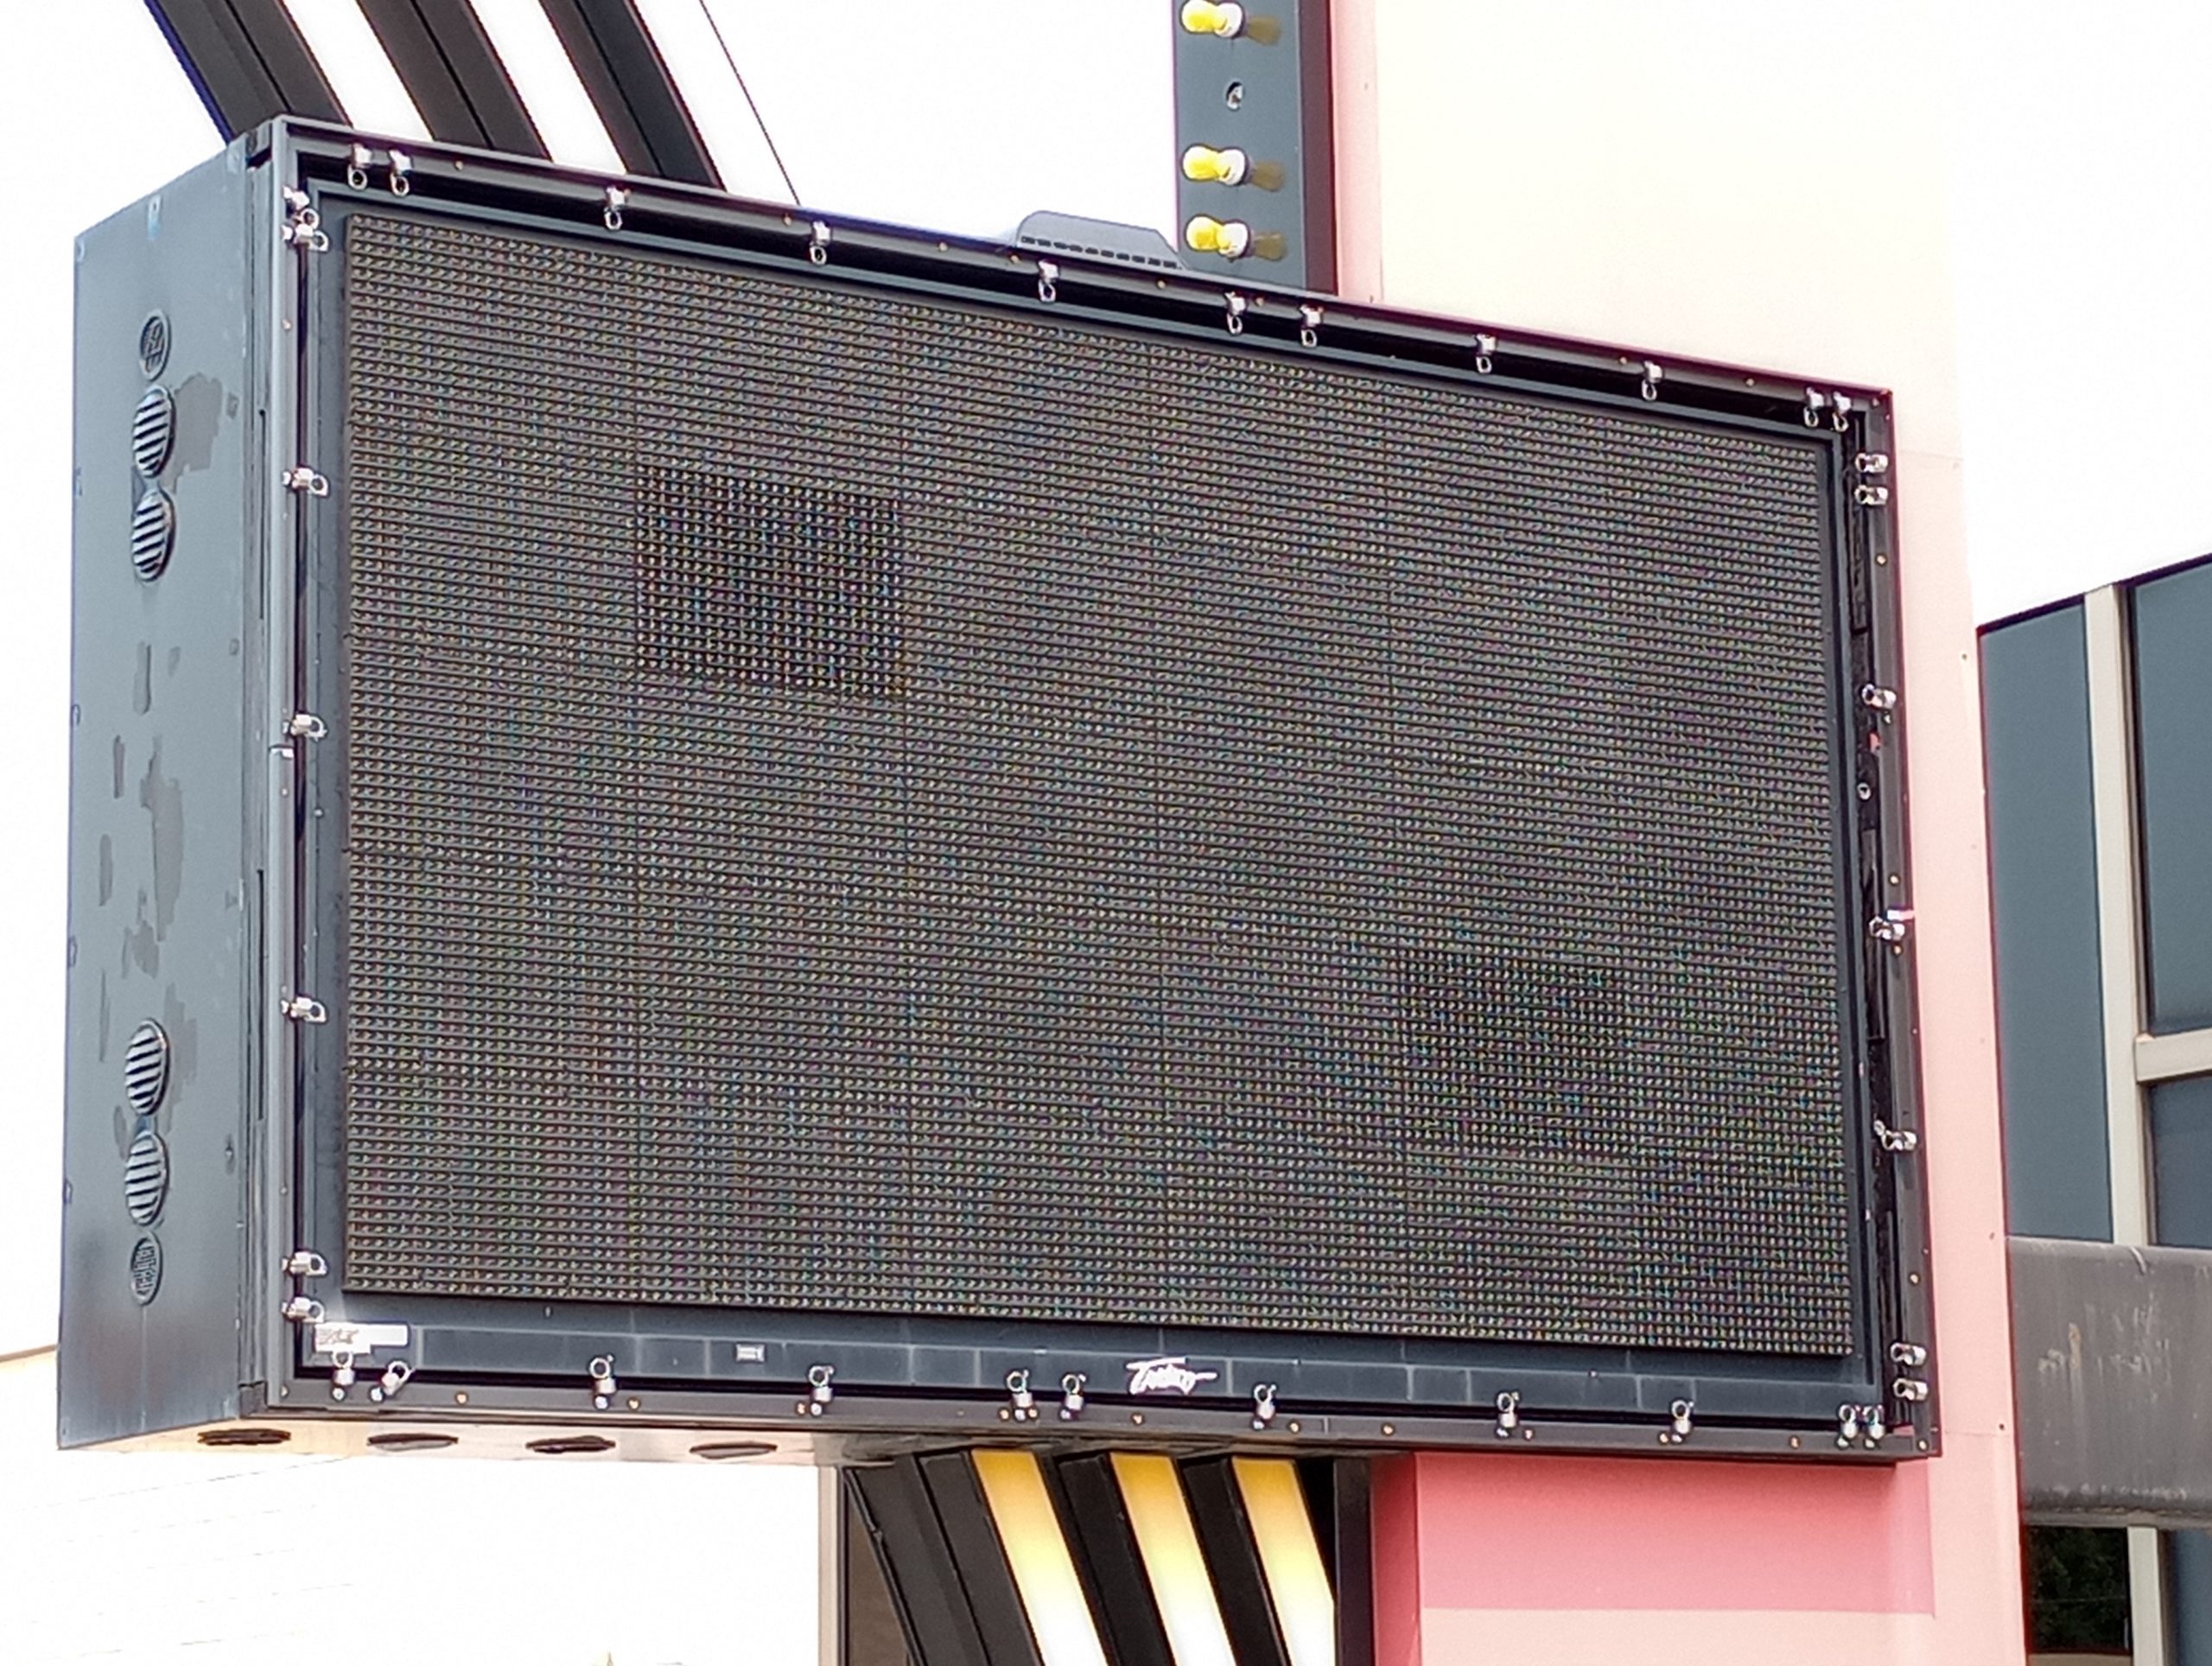 Renaissance-Theatre-Broken-Digital-Problem-Solved-BannerFrame-CLASSIC-frame-installed-scaled When A Digital Sign Goes Bad, It's Time to Go Old School